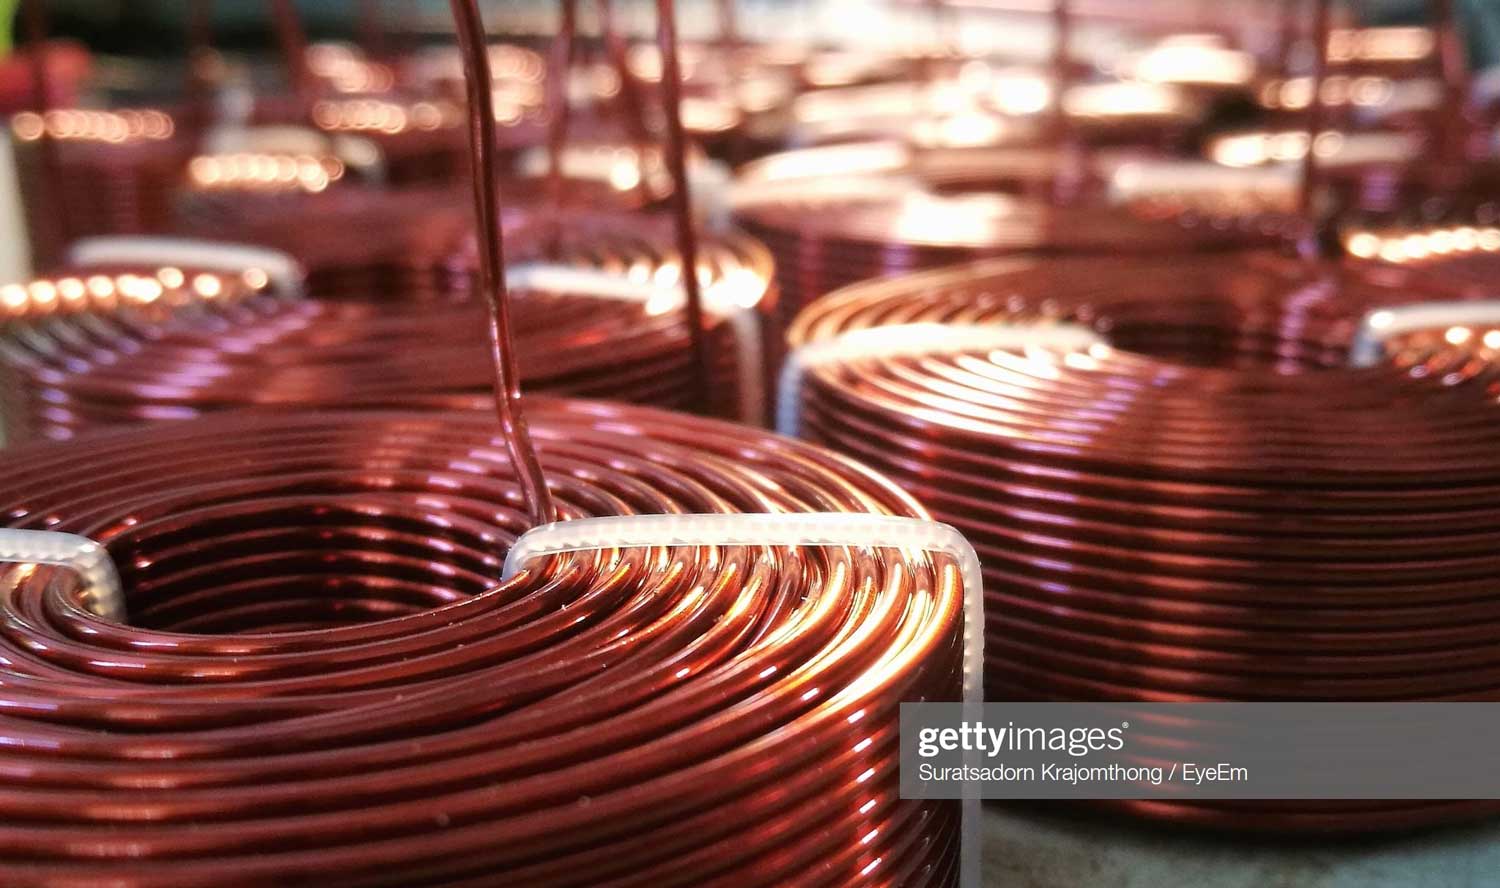 Copper wire produced using copper wire drawing lubricant Lubricool manufactured by Metalube